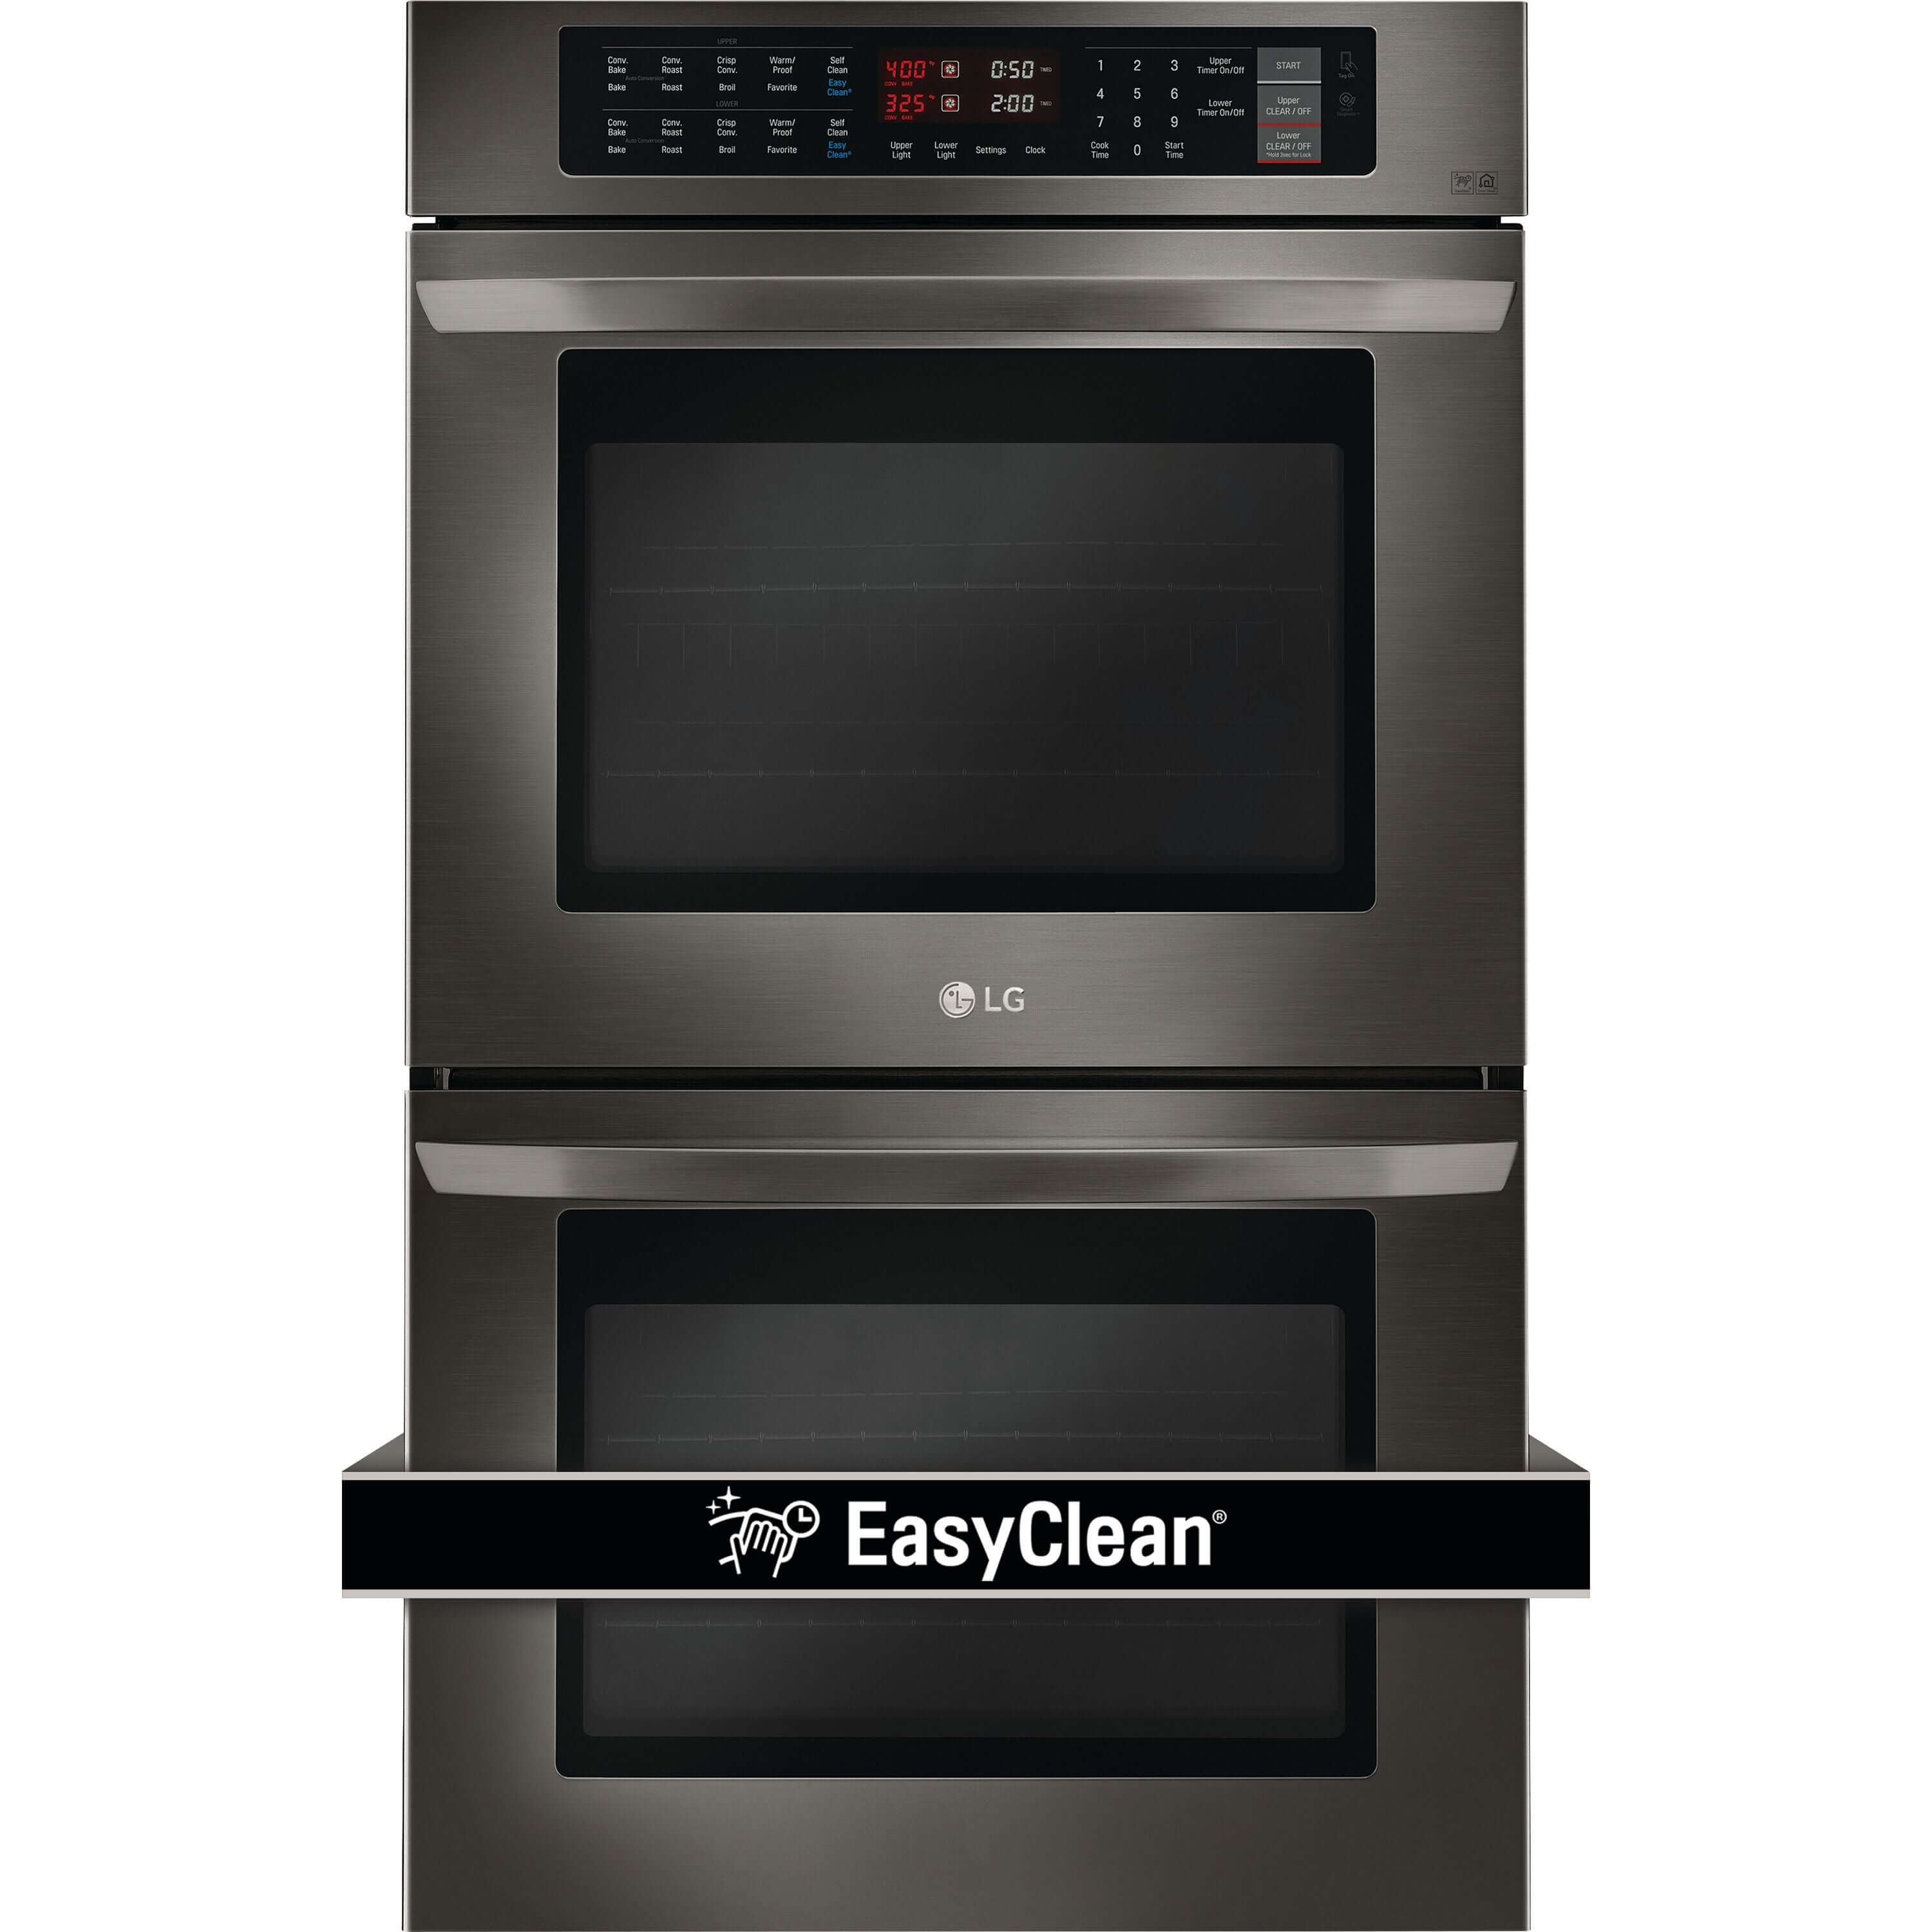 LG 30 in. Electric Double Wall Oven with True Convection in Black Stainless Steel (LWD3063BD)